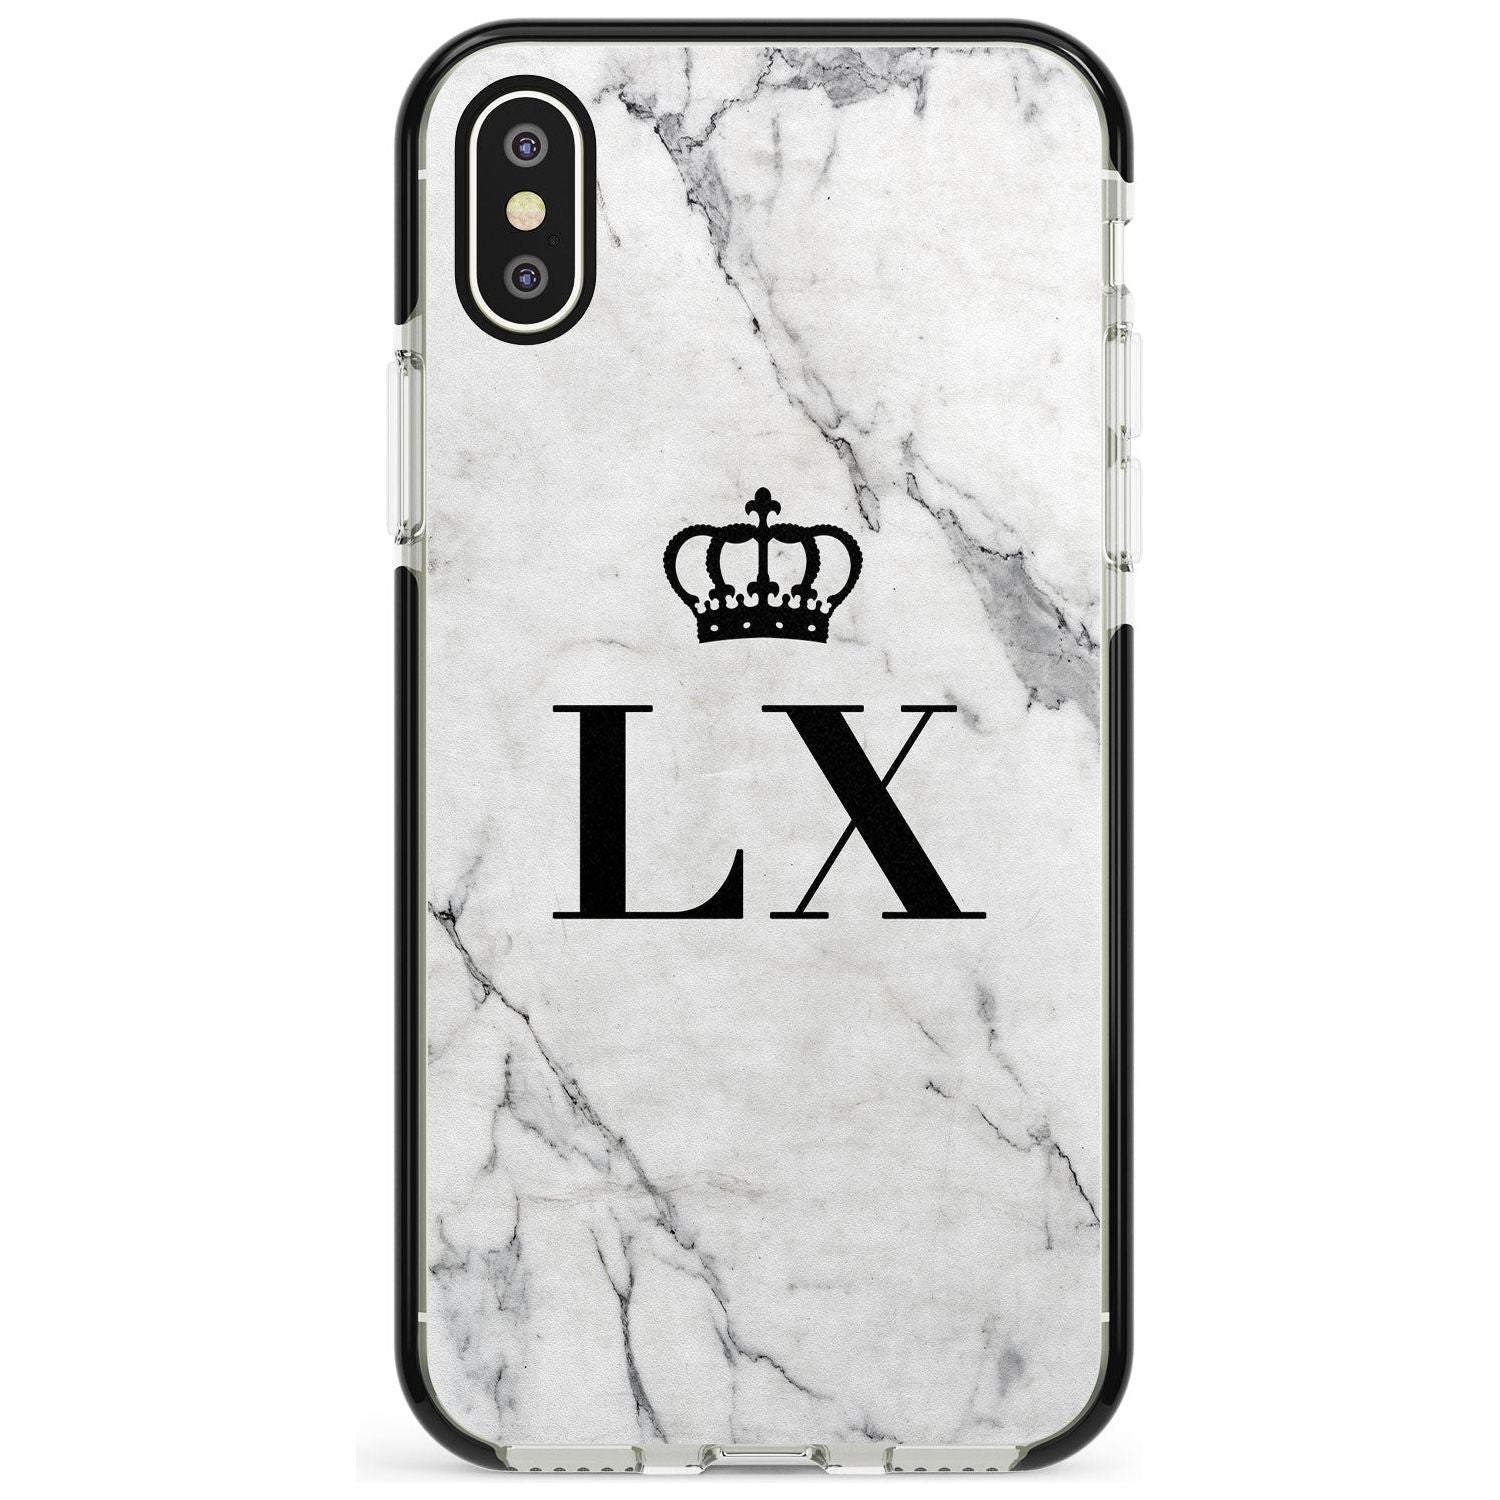 Personalised Initials with Crown on White Marble Black Impact Phone Case for iPhone X XS Max XR